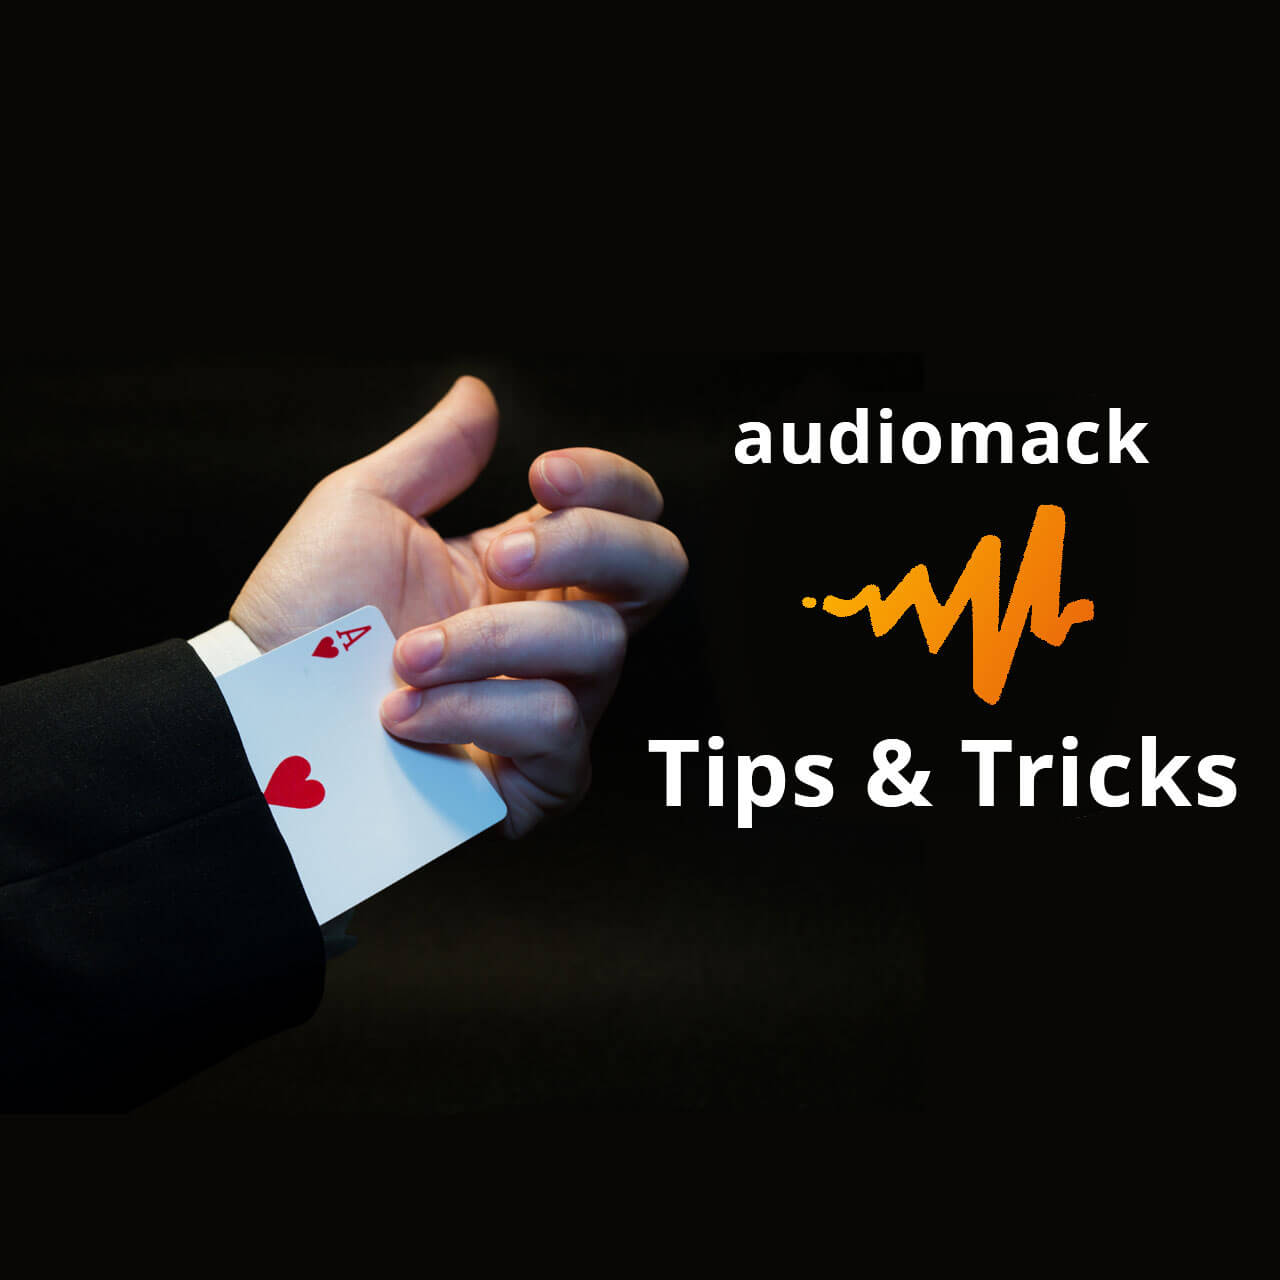 audiomack tips and tricks 2022